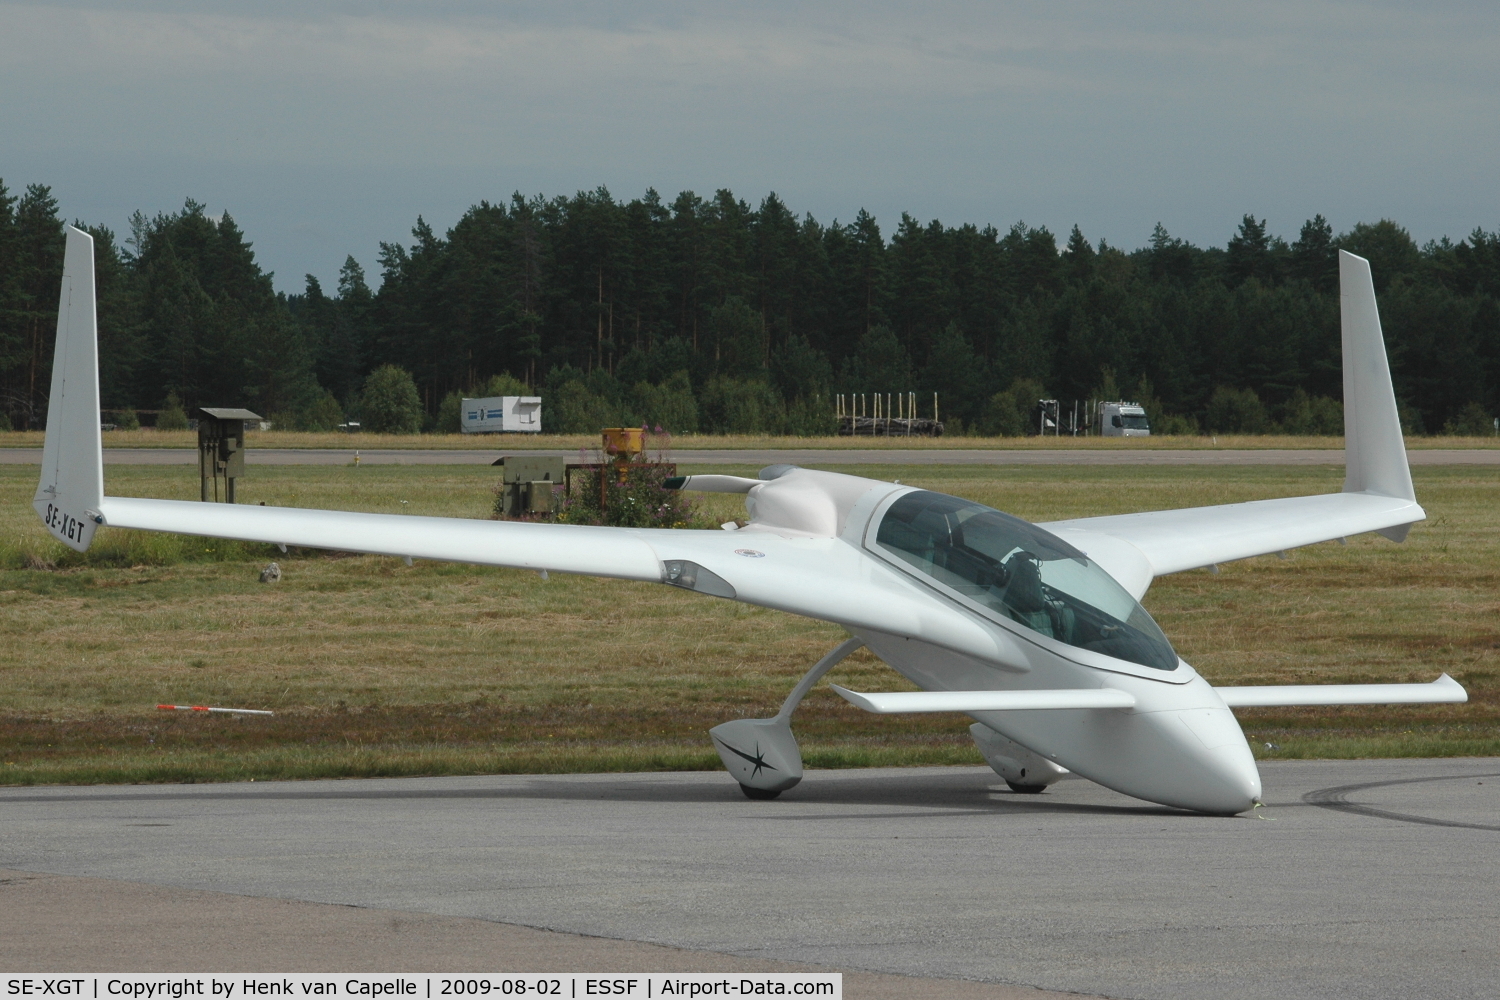 SE-XGT, 1996 Rutan Long-EZ C/N 607-197, Long-EZ parked at Hultsfred airfield in Sweden.